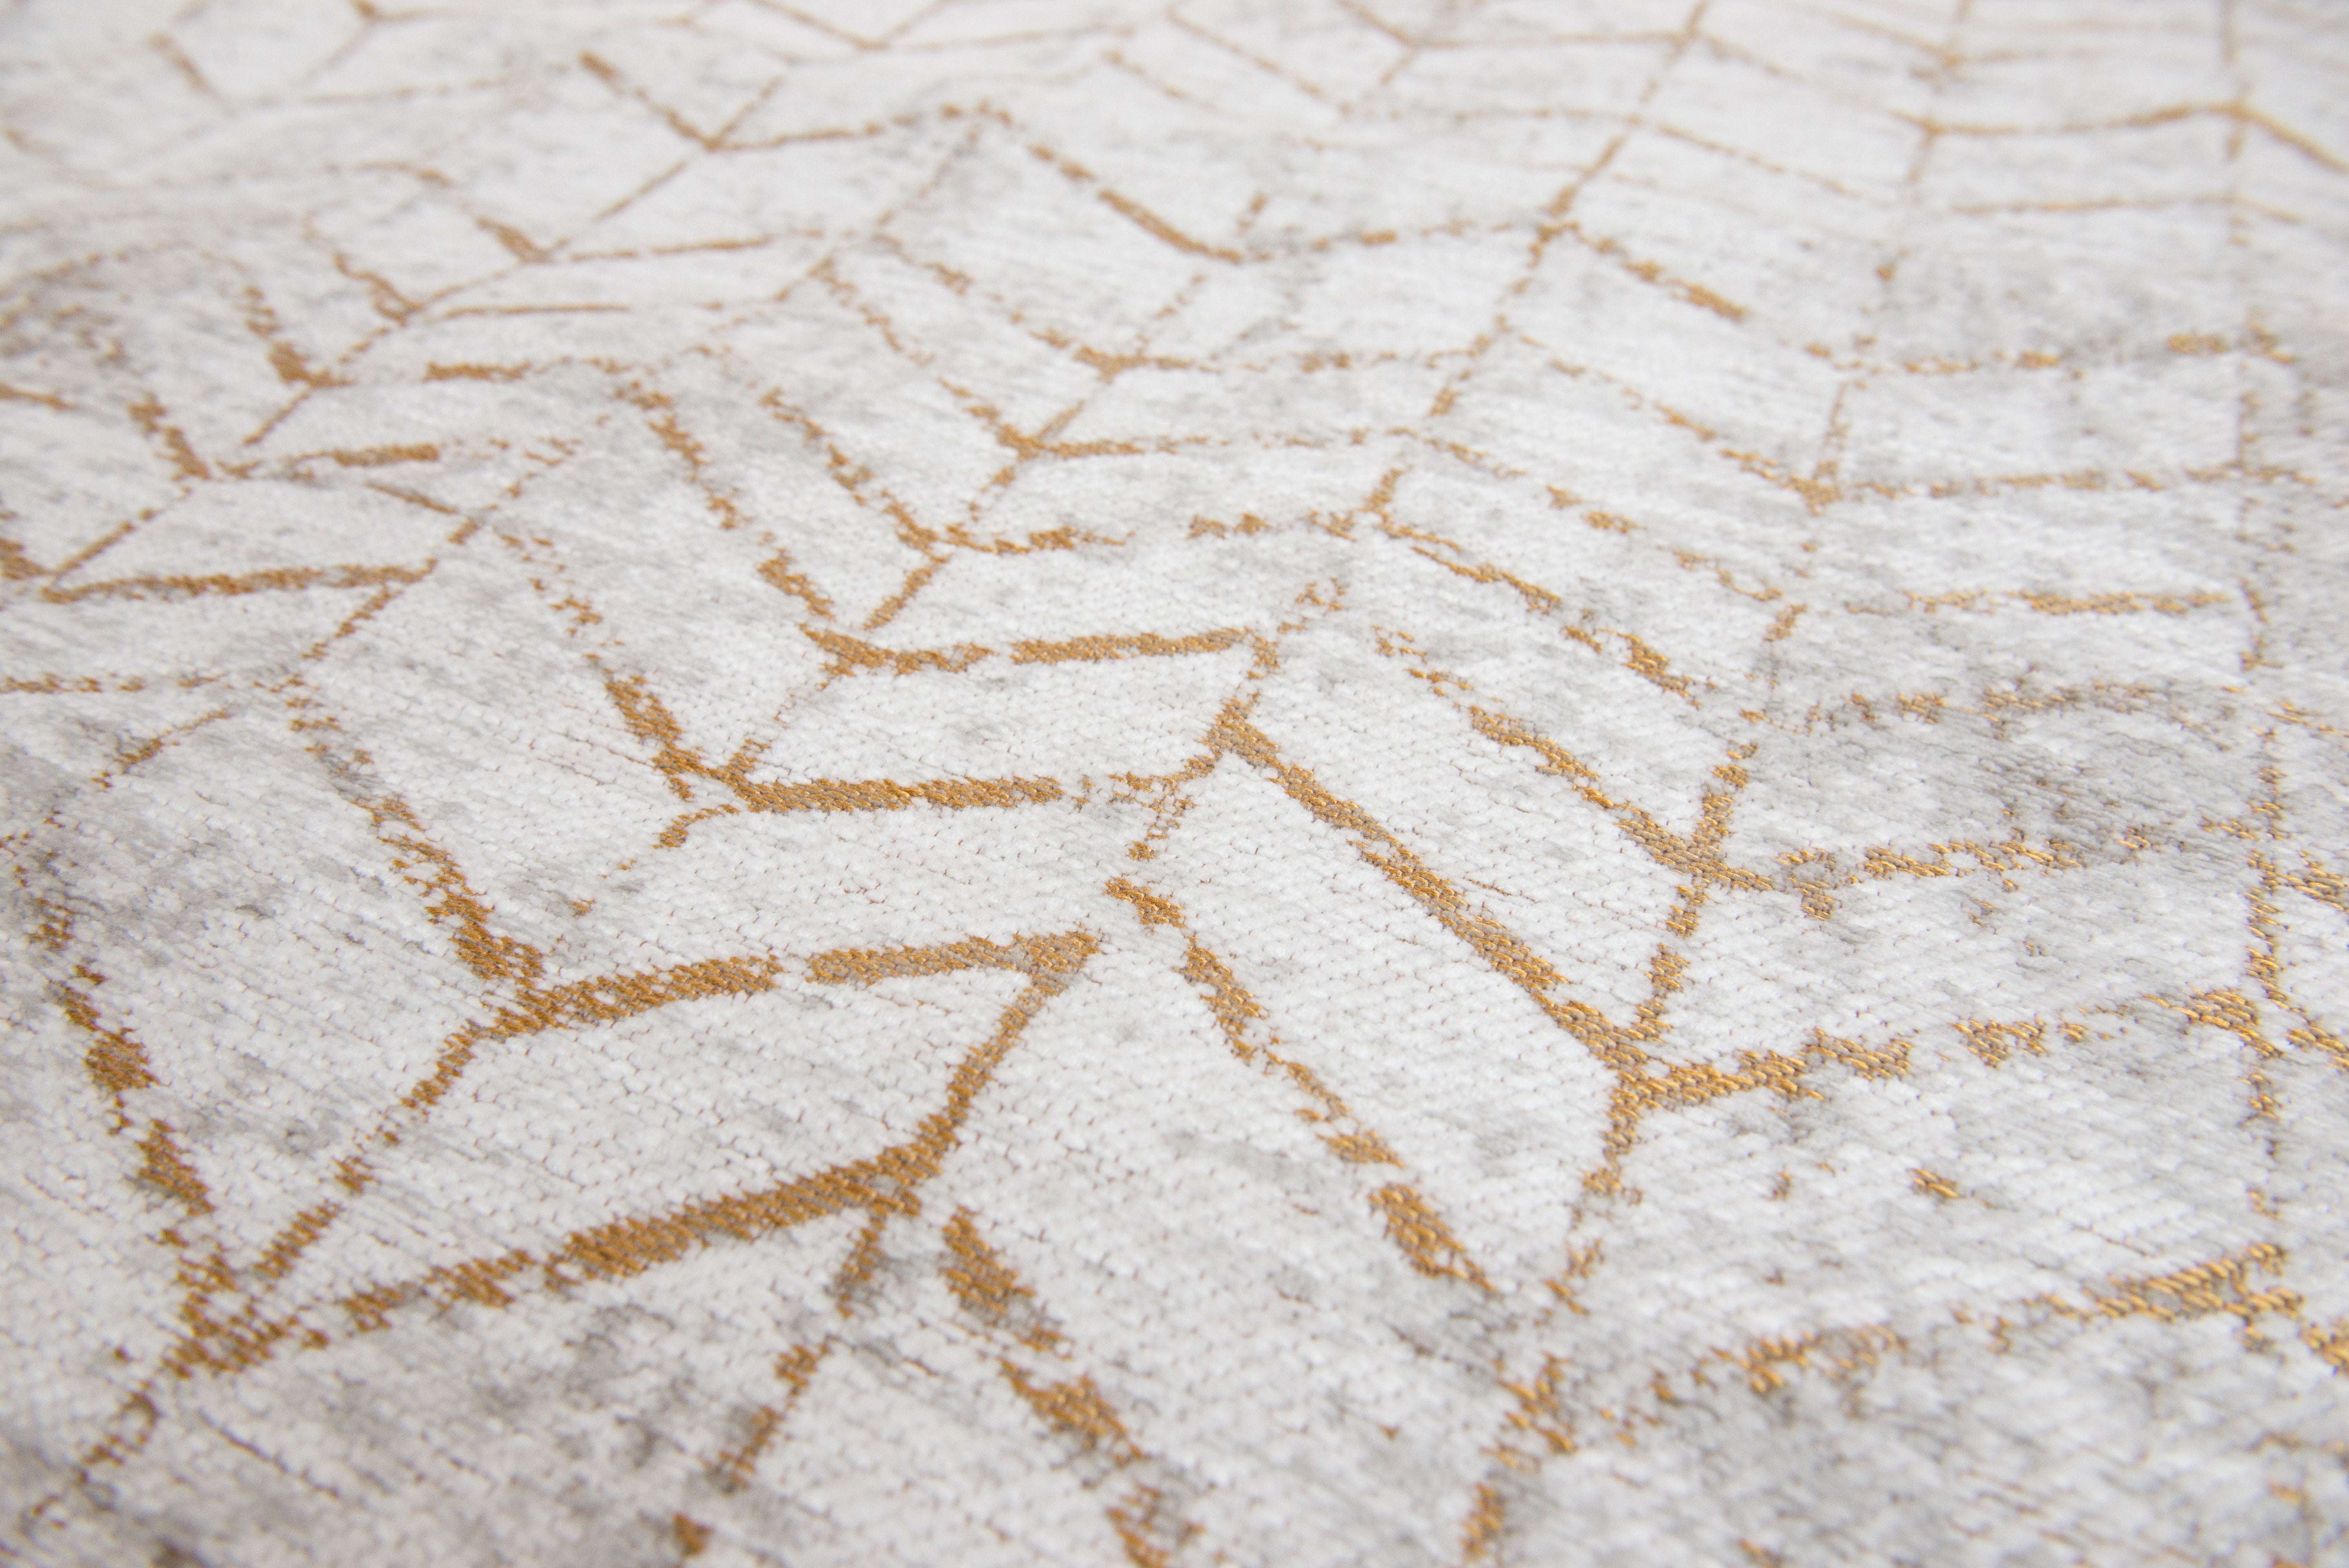 White flatweave runner rug with faded yellow chevron pattern